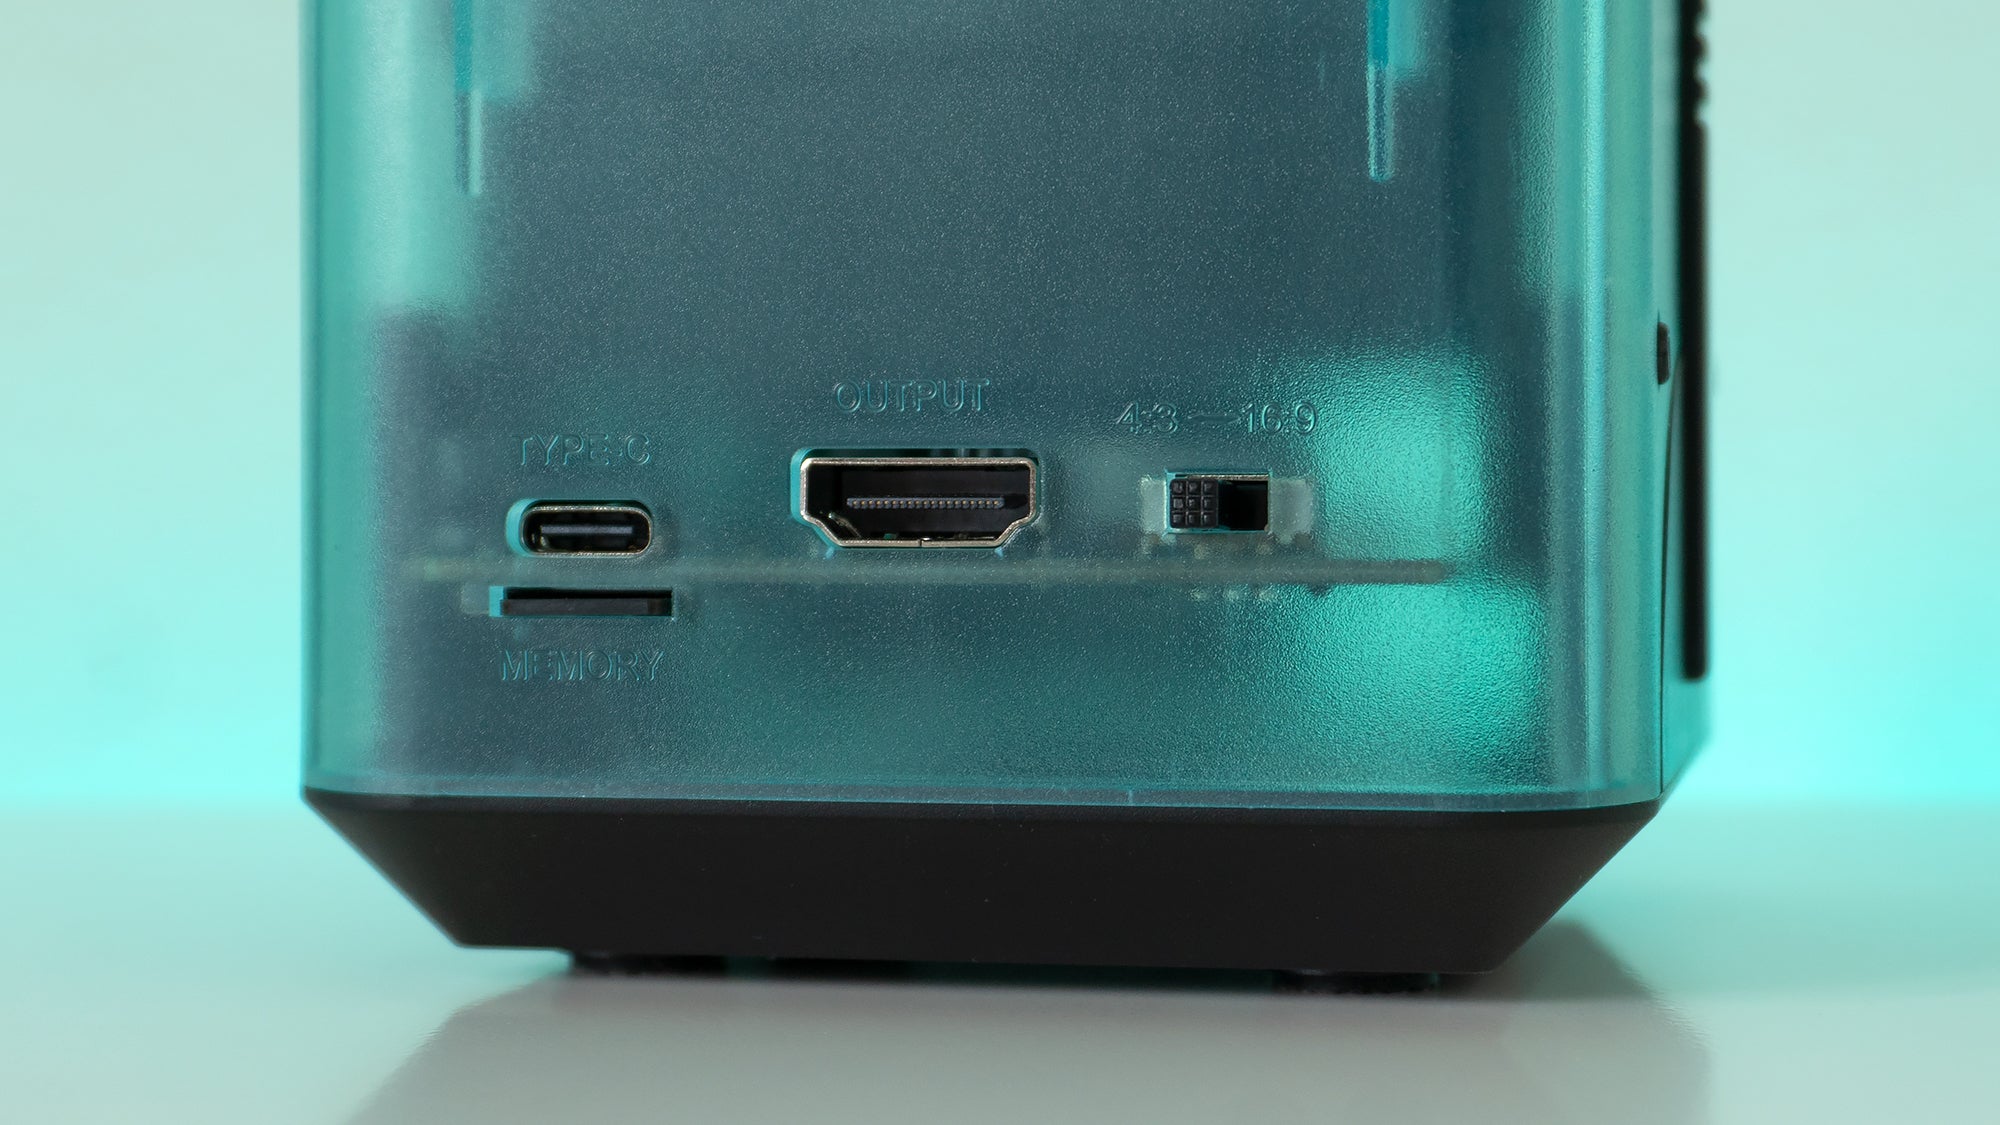 An aspect ratio switch on the back switches between 4:3 and 16:9, although neither of those match the aspect ratios of the Game Boy and Game Boy Advance's screens. (Photo: Andrew Liszewski/Gizmodo)